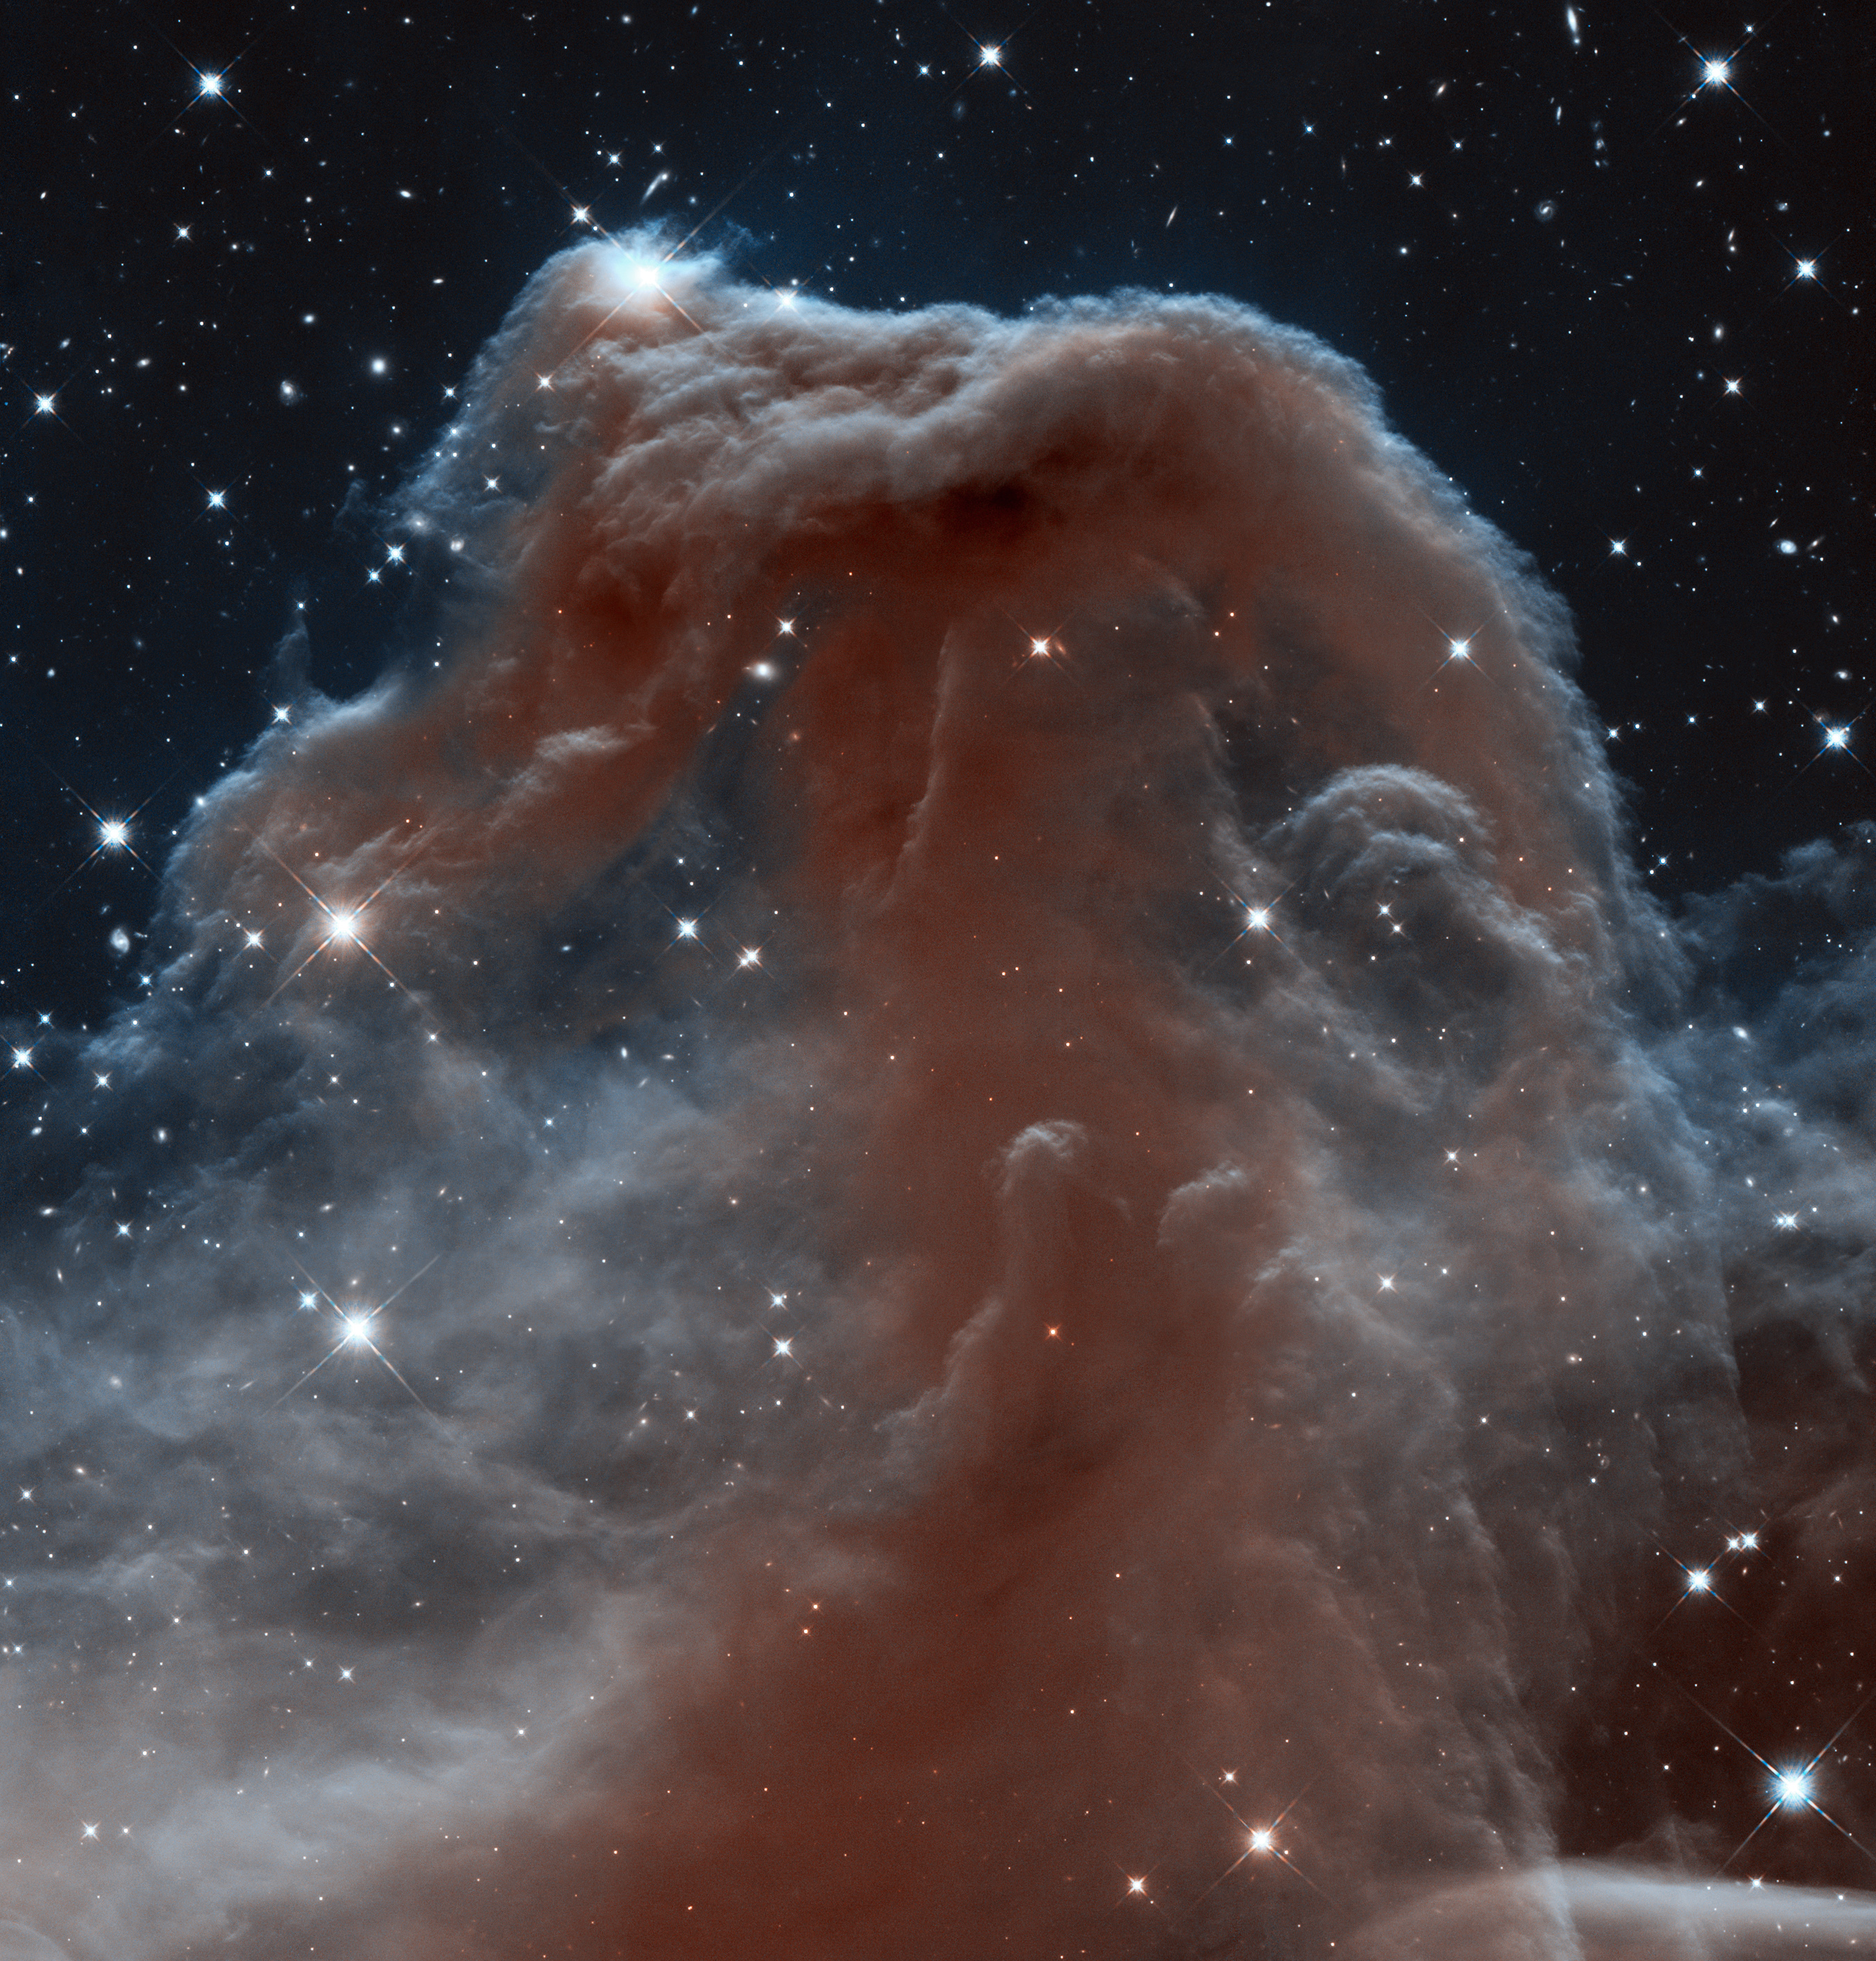 Large, dark red cloud of dust and gas surrounded by grey wisps of smoke and gas. Many stars in the black background of space.